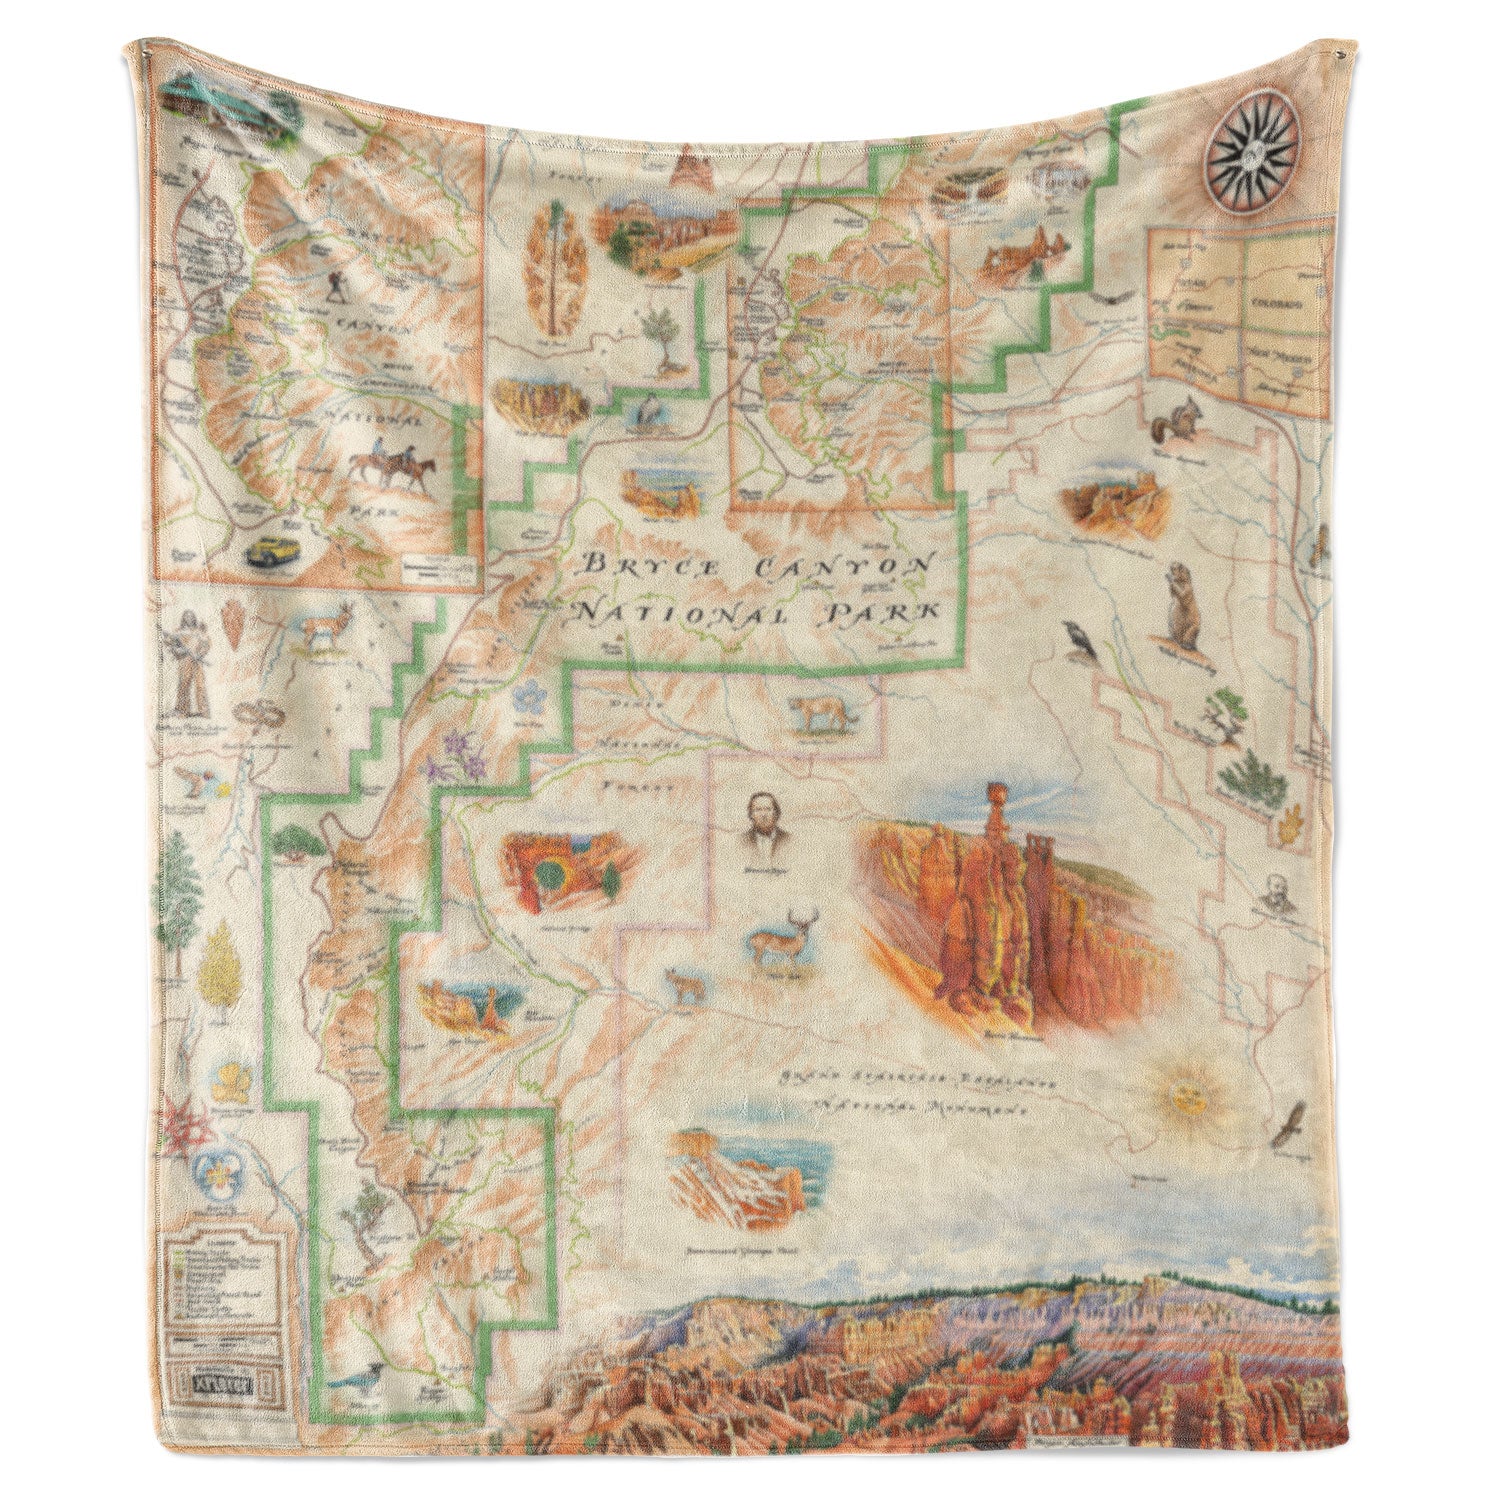 Hanging fleece blanket with a map of Bryce Canyon National Park. The map features Thors Hammer, Bryce Amphitheatre, and Ebenezer Bryce. Measures 58